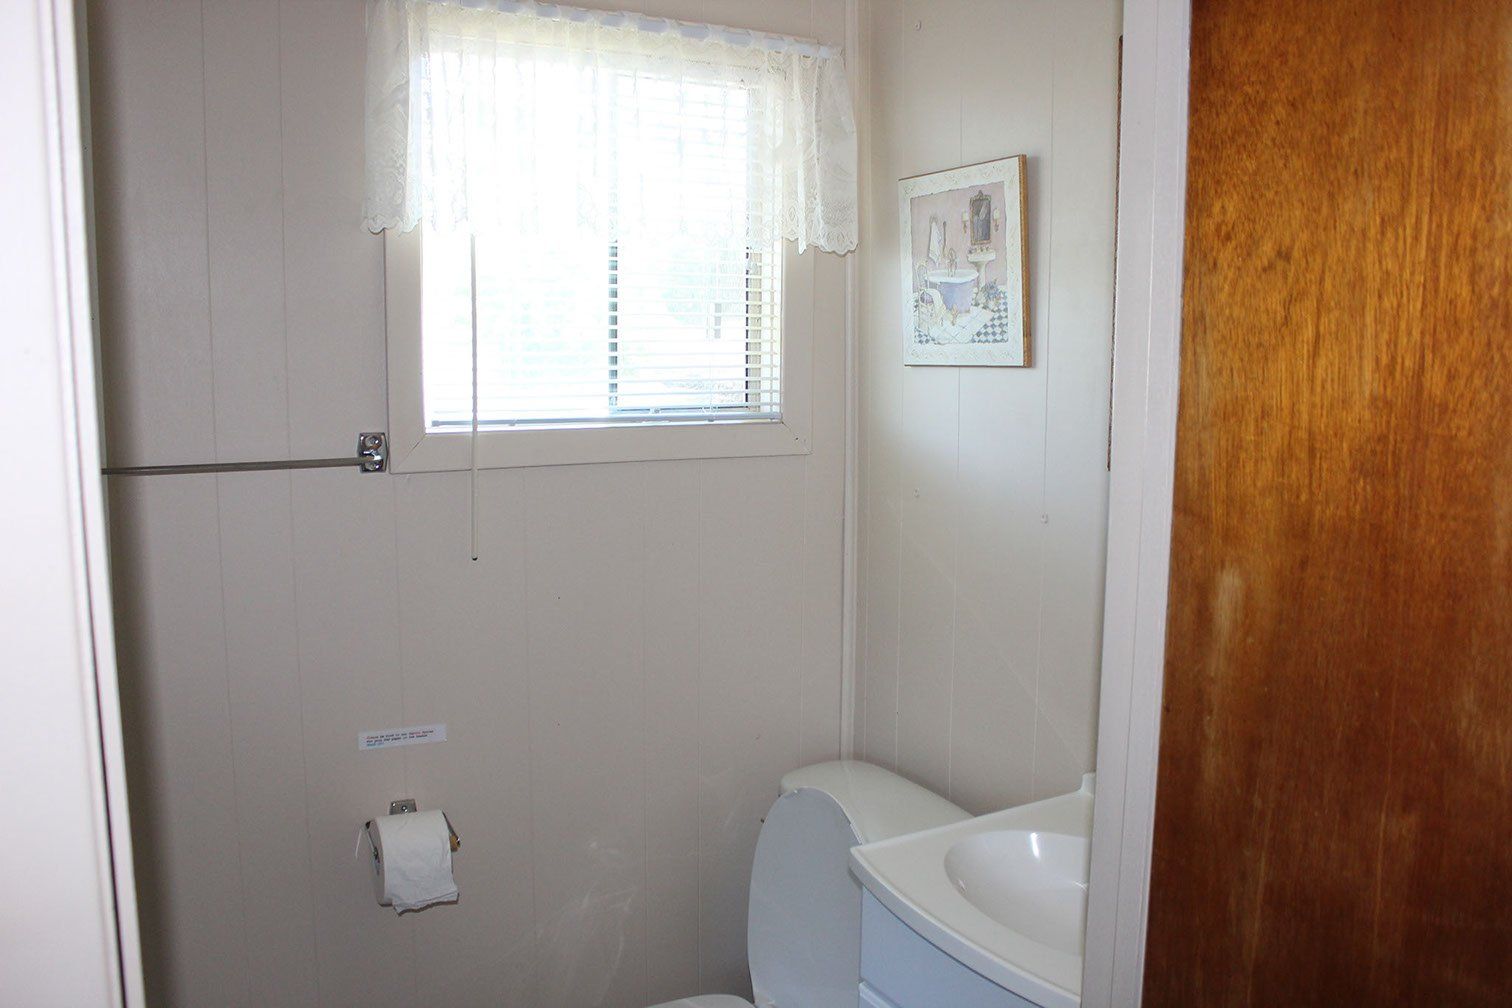 A bathroom with a toilet , sink and window.